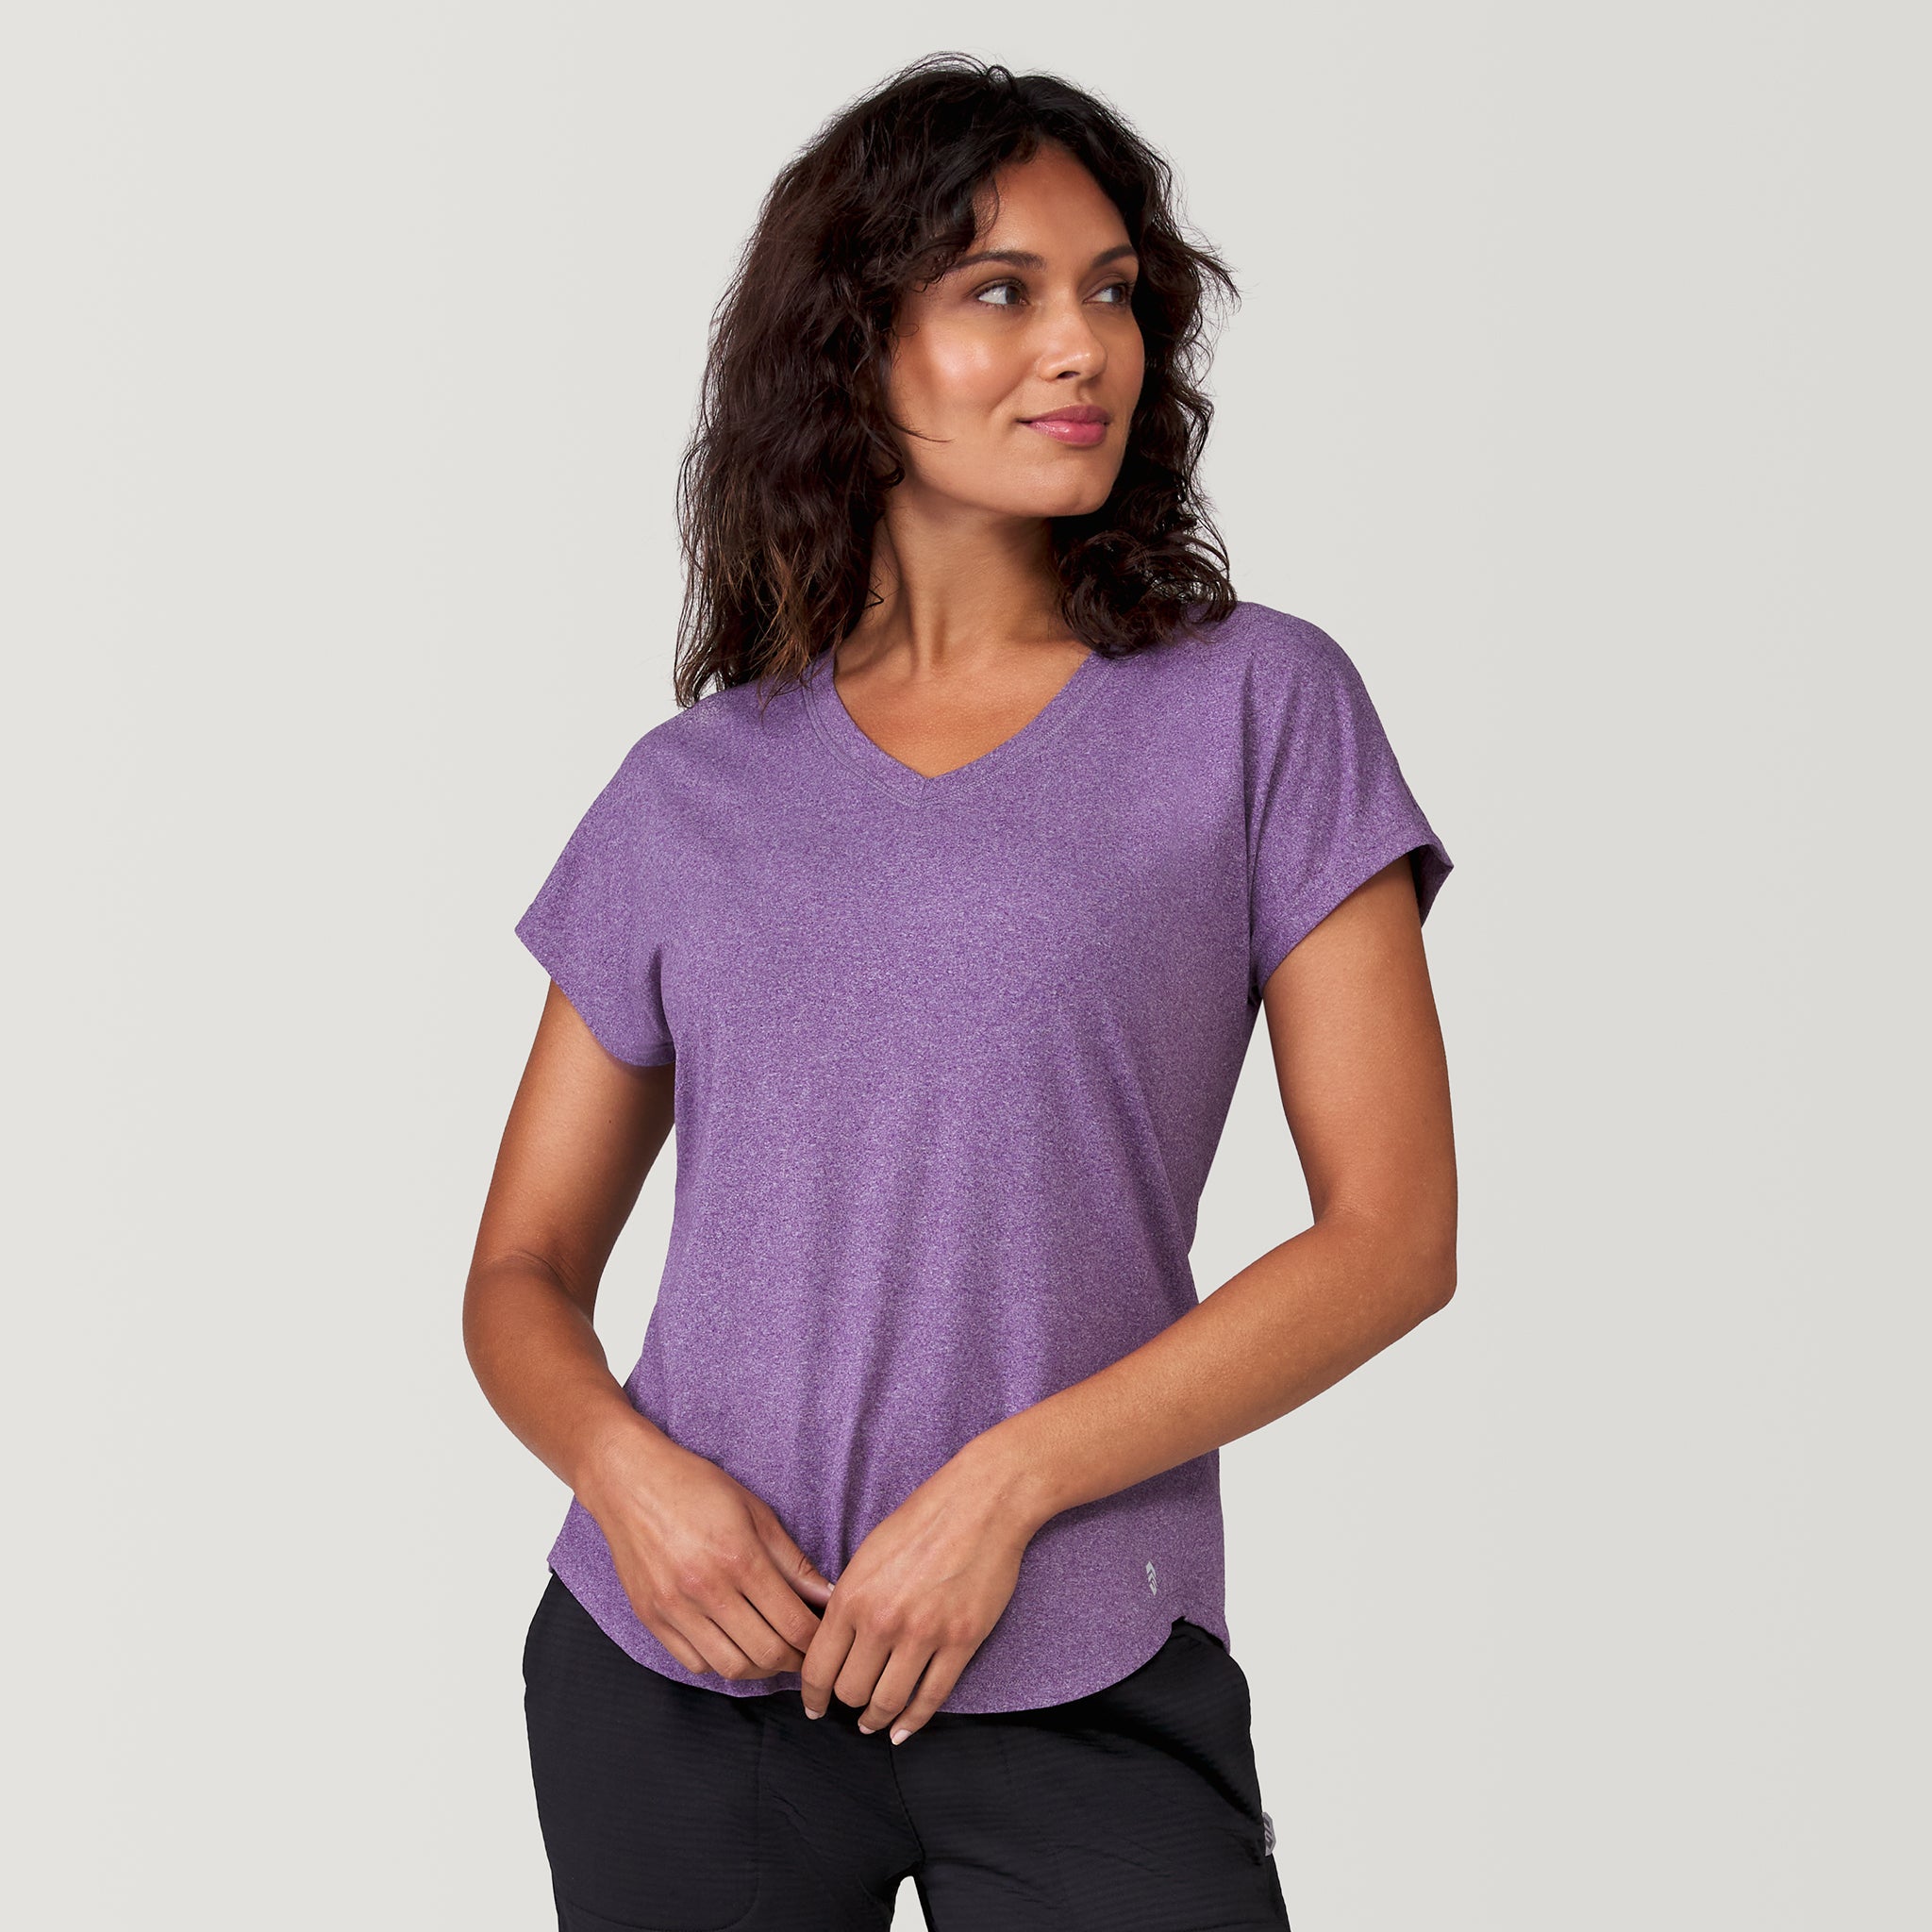 Women's Microtech® Chill B Cool Tee - Free Country - Top